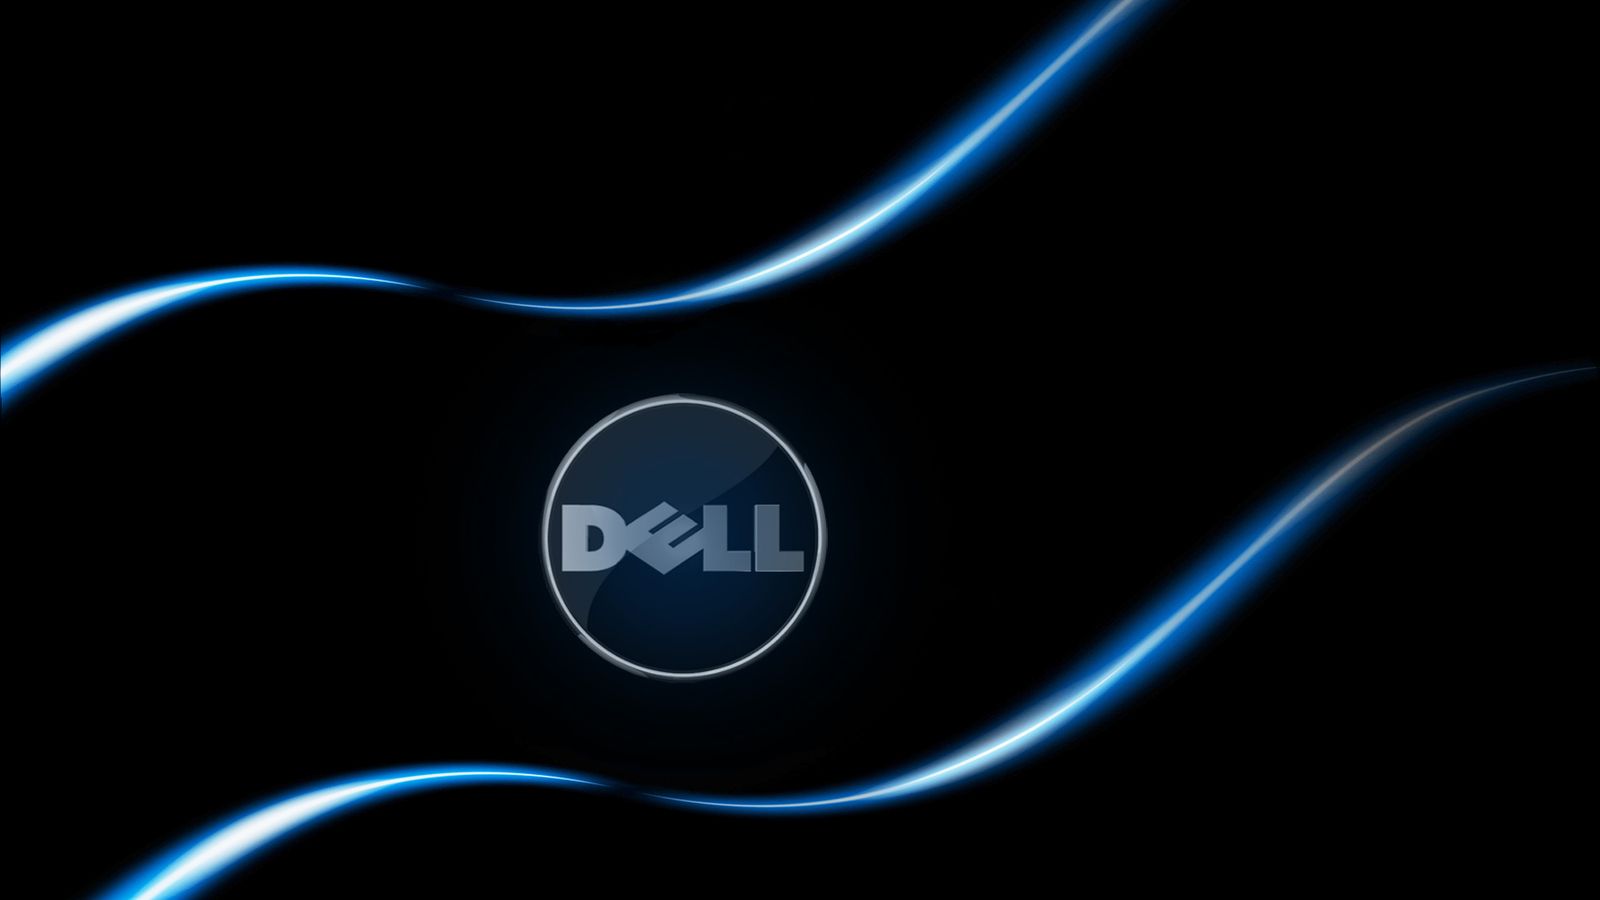 Free Dell Wallpaper Downloads 100 Dell Wallpapers for FREE  Wallpapers com